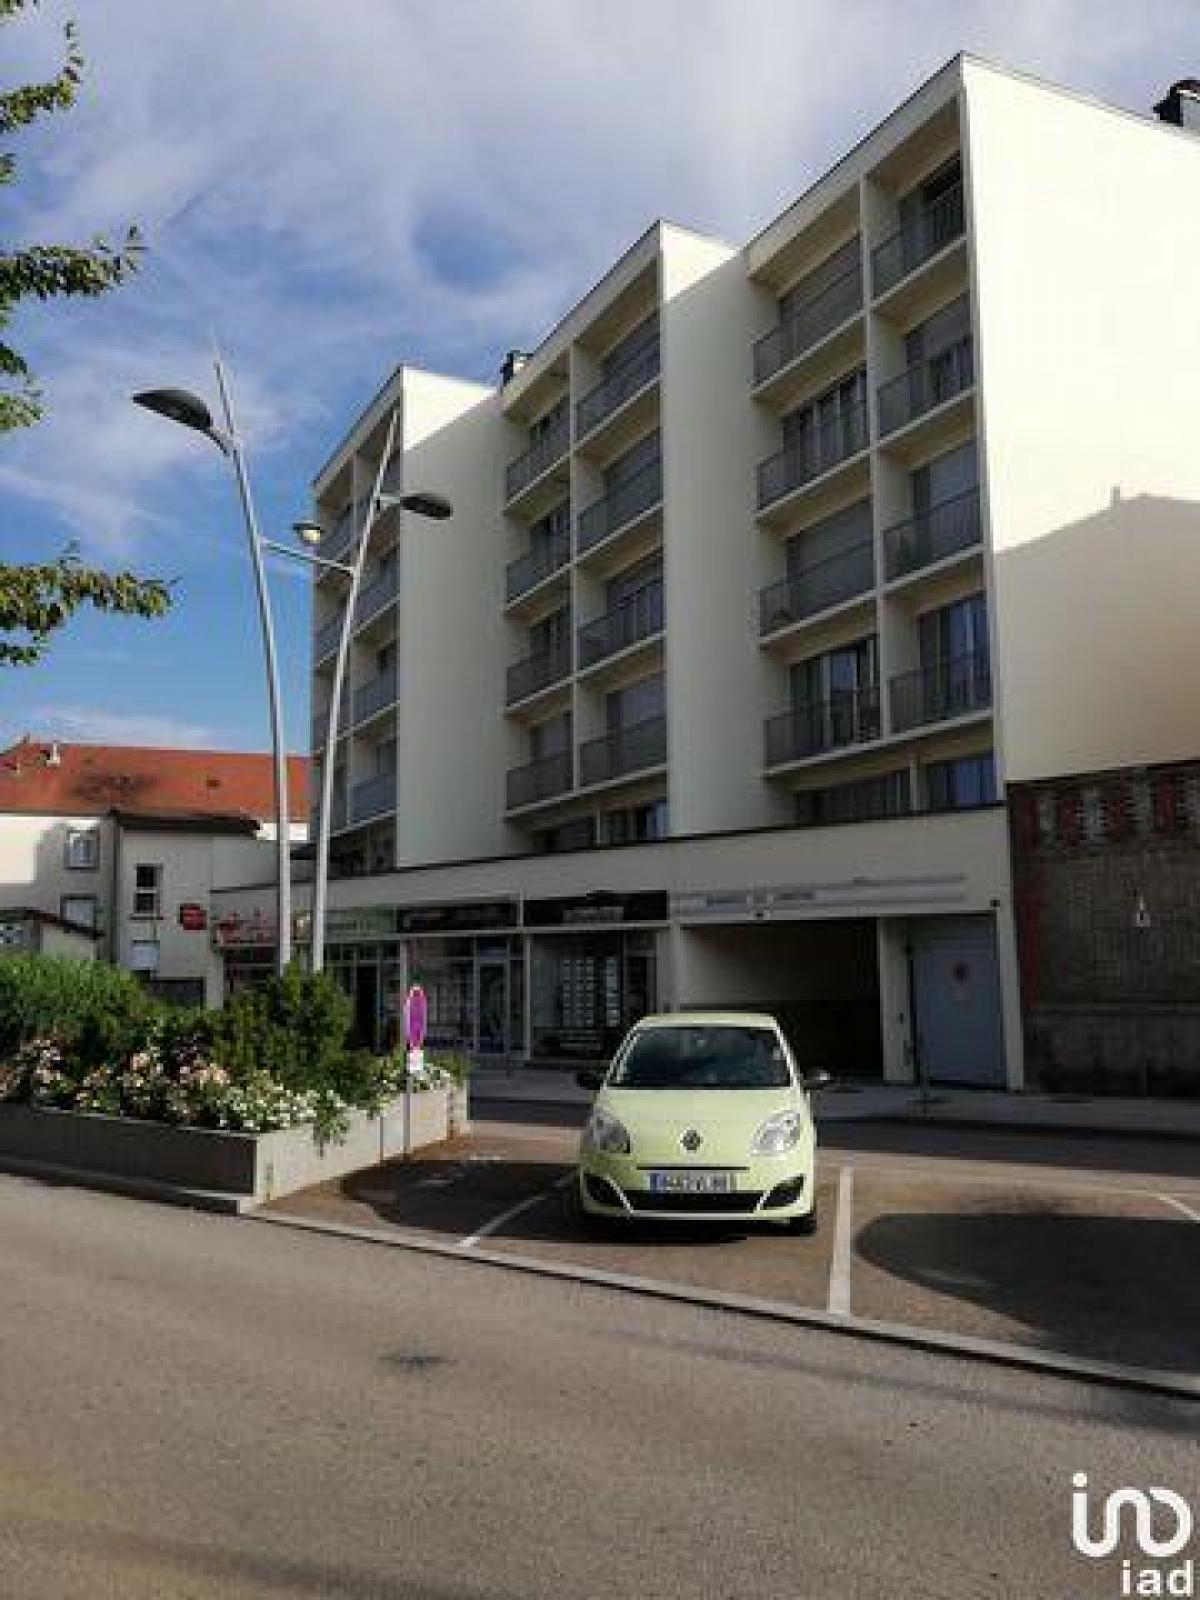 Picture of Condo For Sale in Remiremont, Lorraine, France